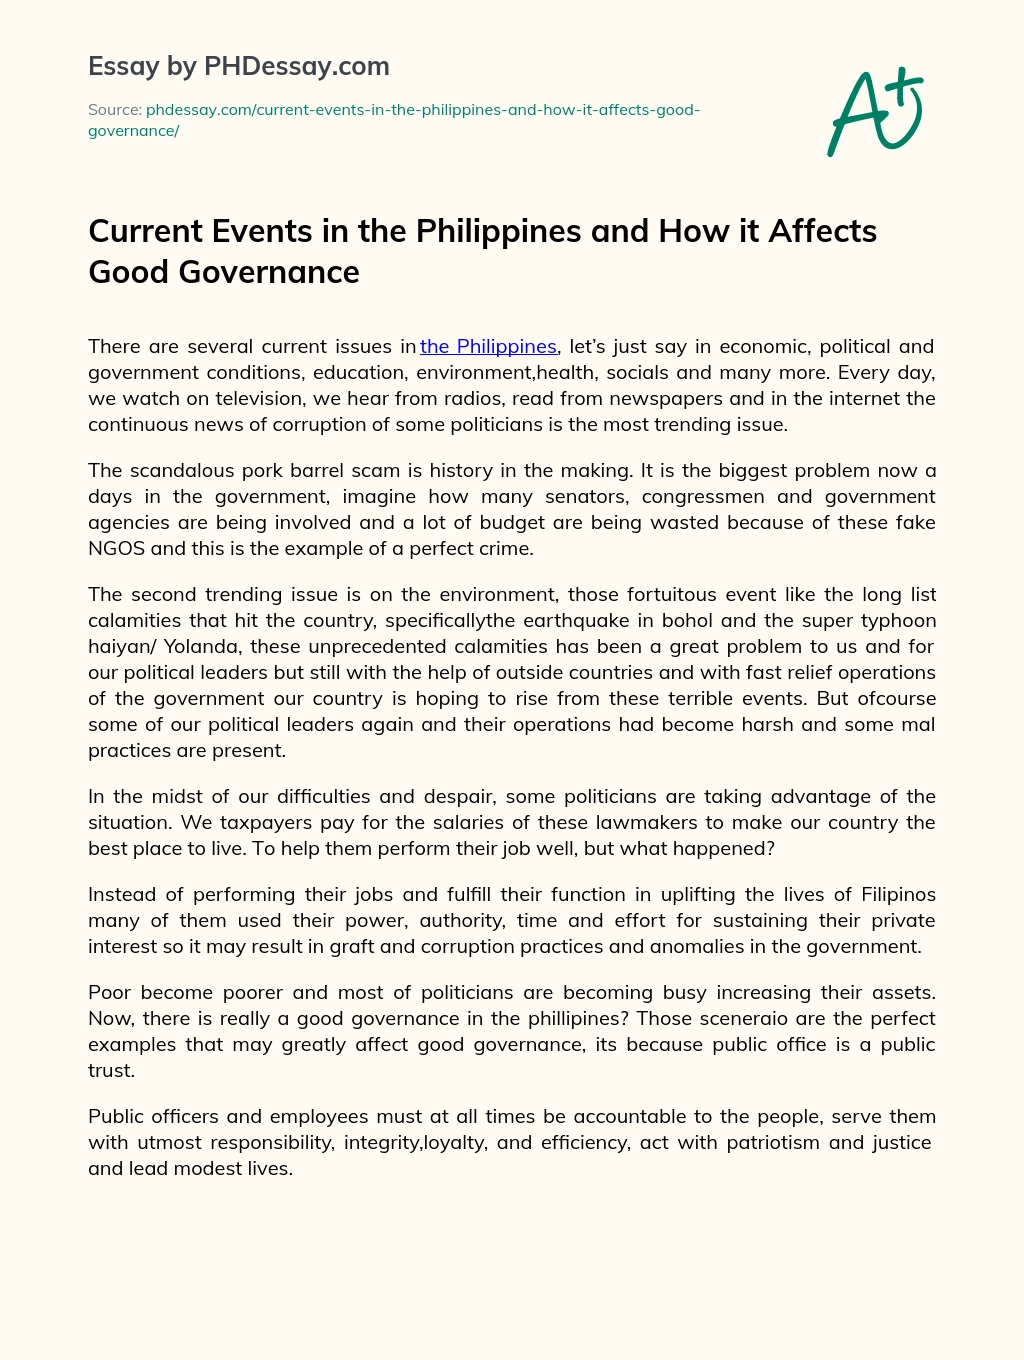 Current Events in the Philippines and How it Affects Good Governance essay